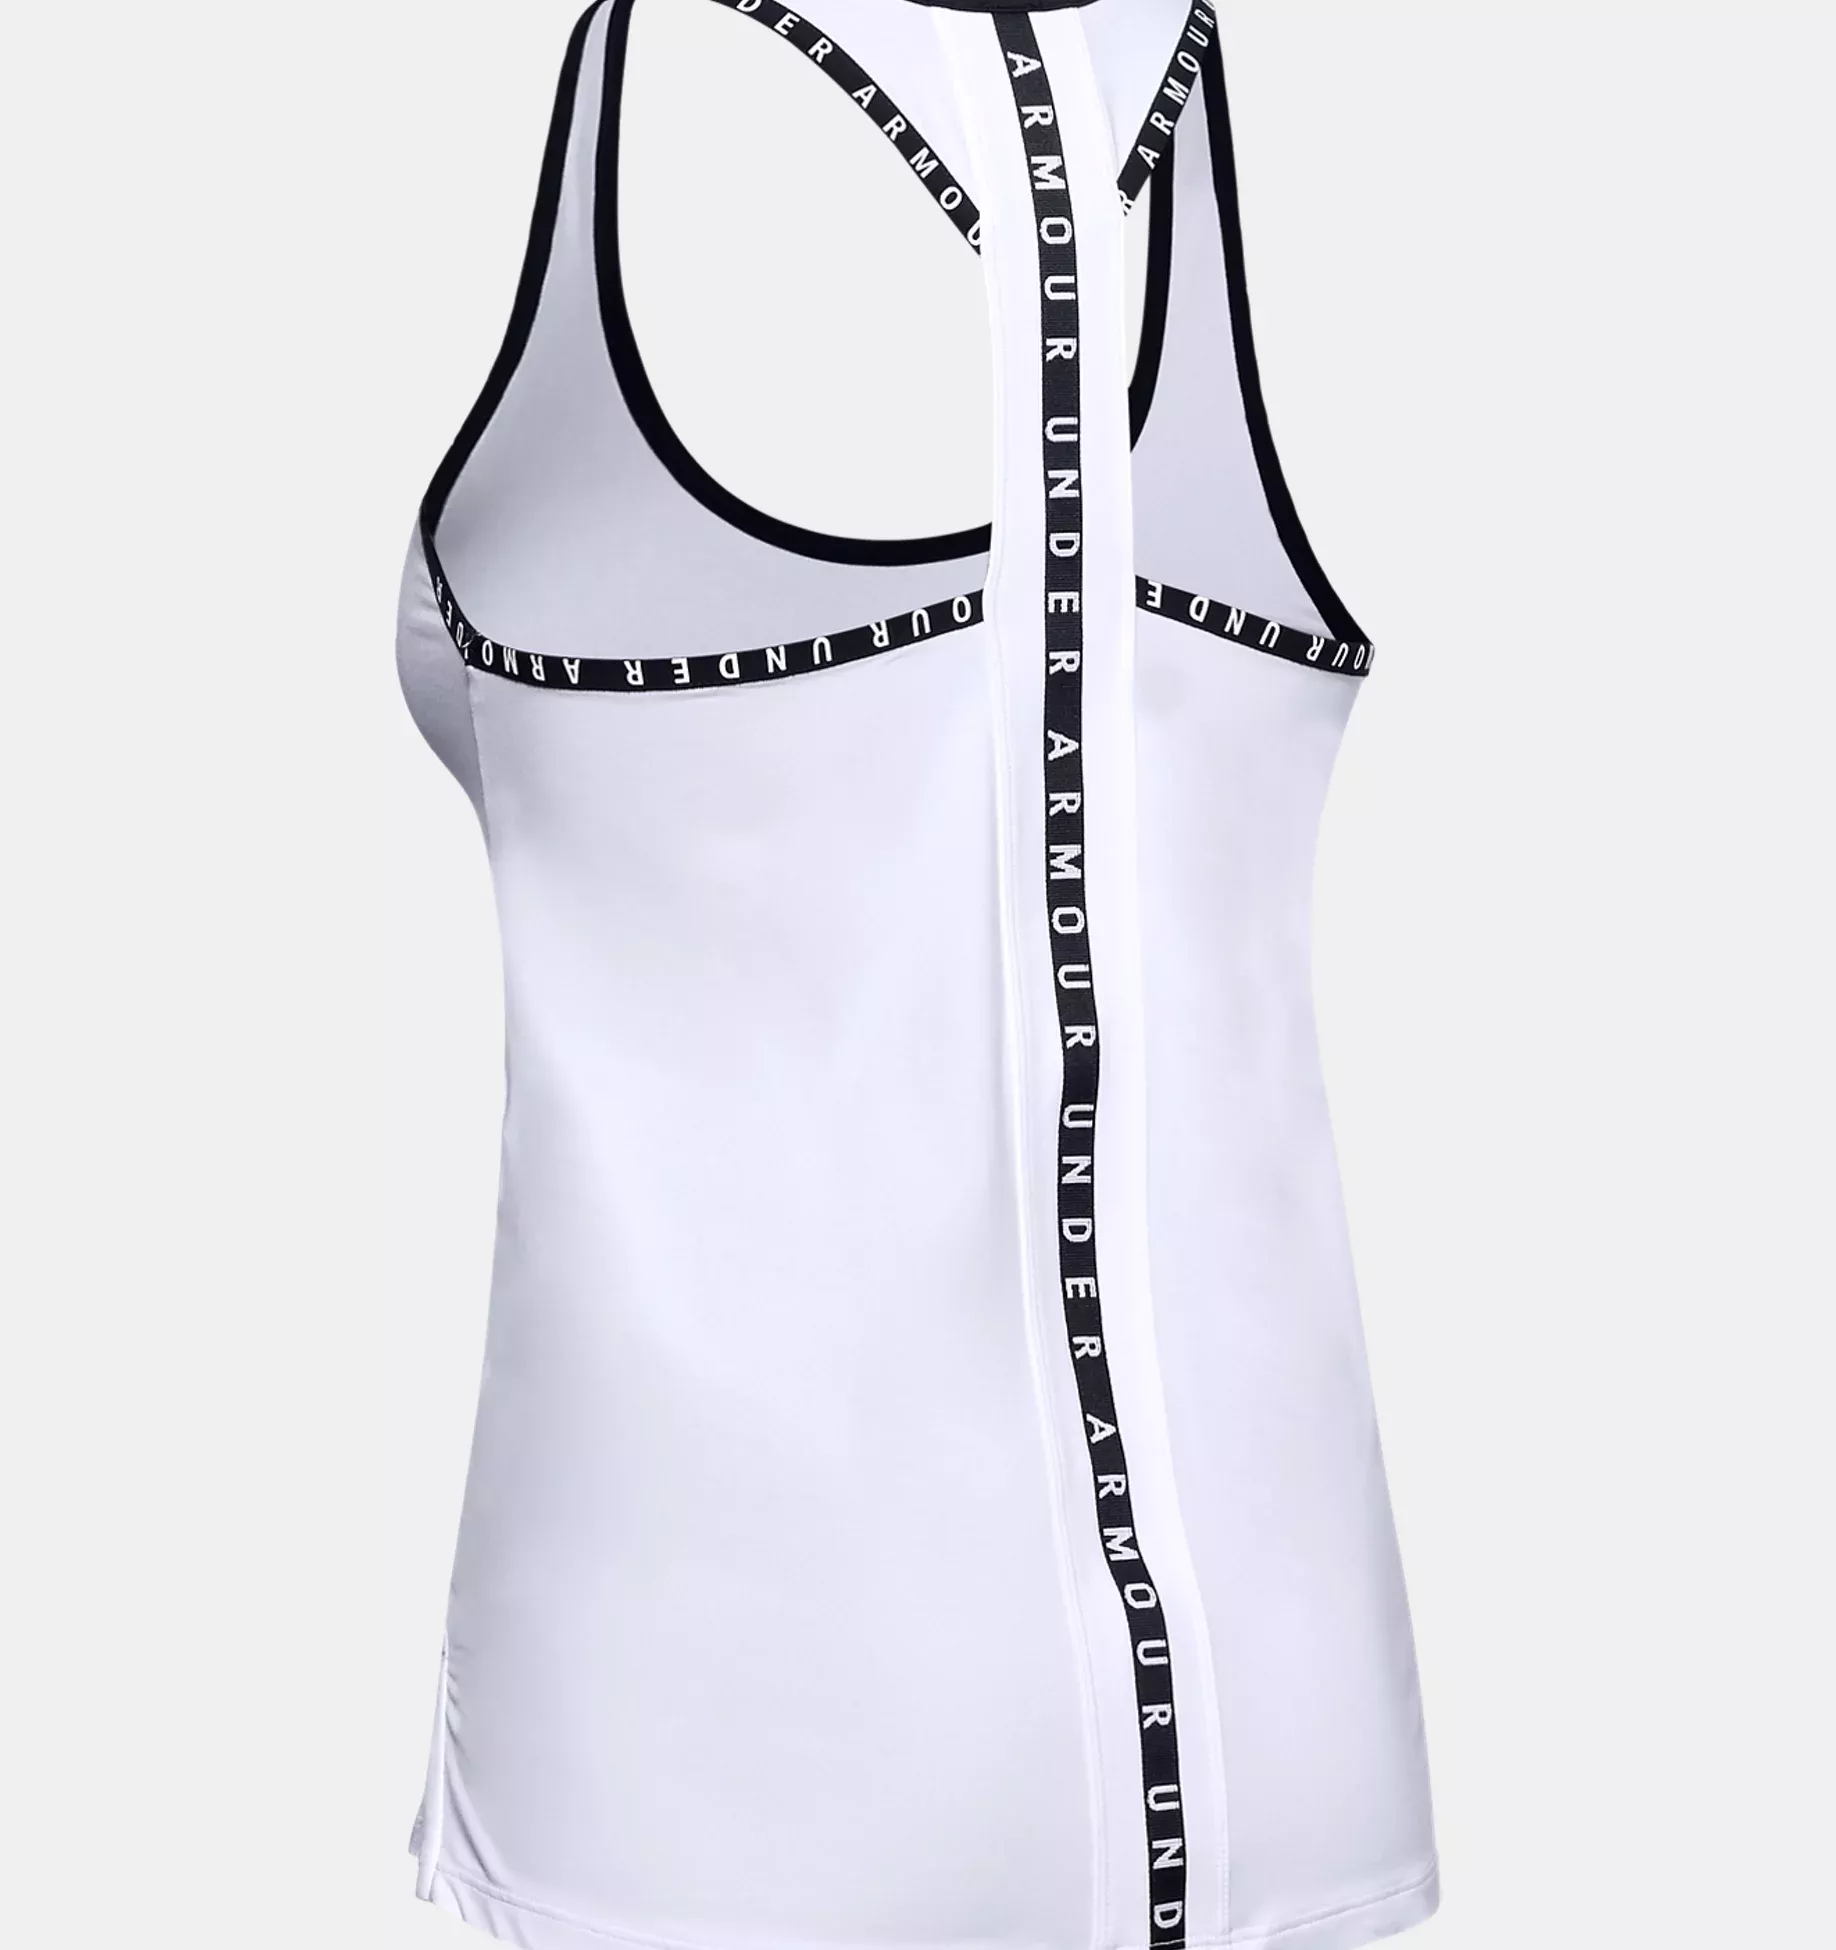 Under Armour Knockout Tank